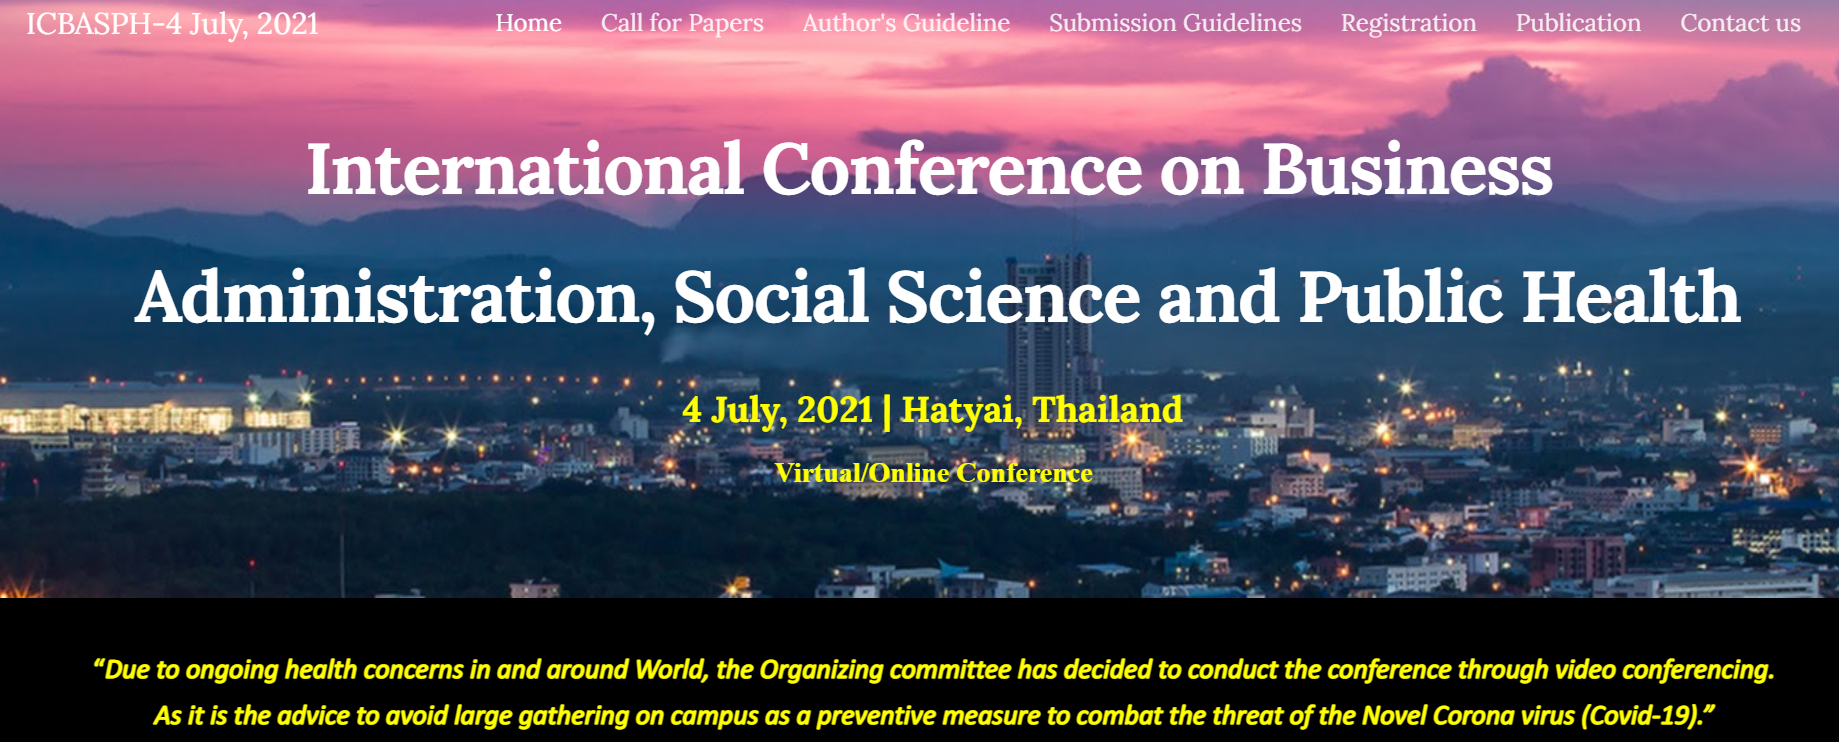 International Conference on Business Administration, Social Science and Public Health, Hatyai, Thailand, Thailand